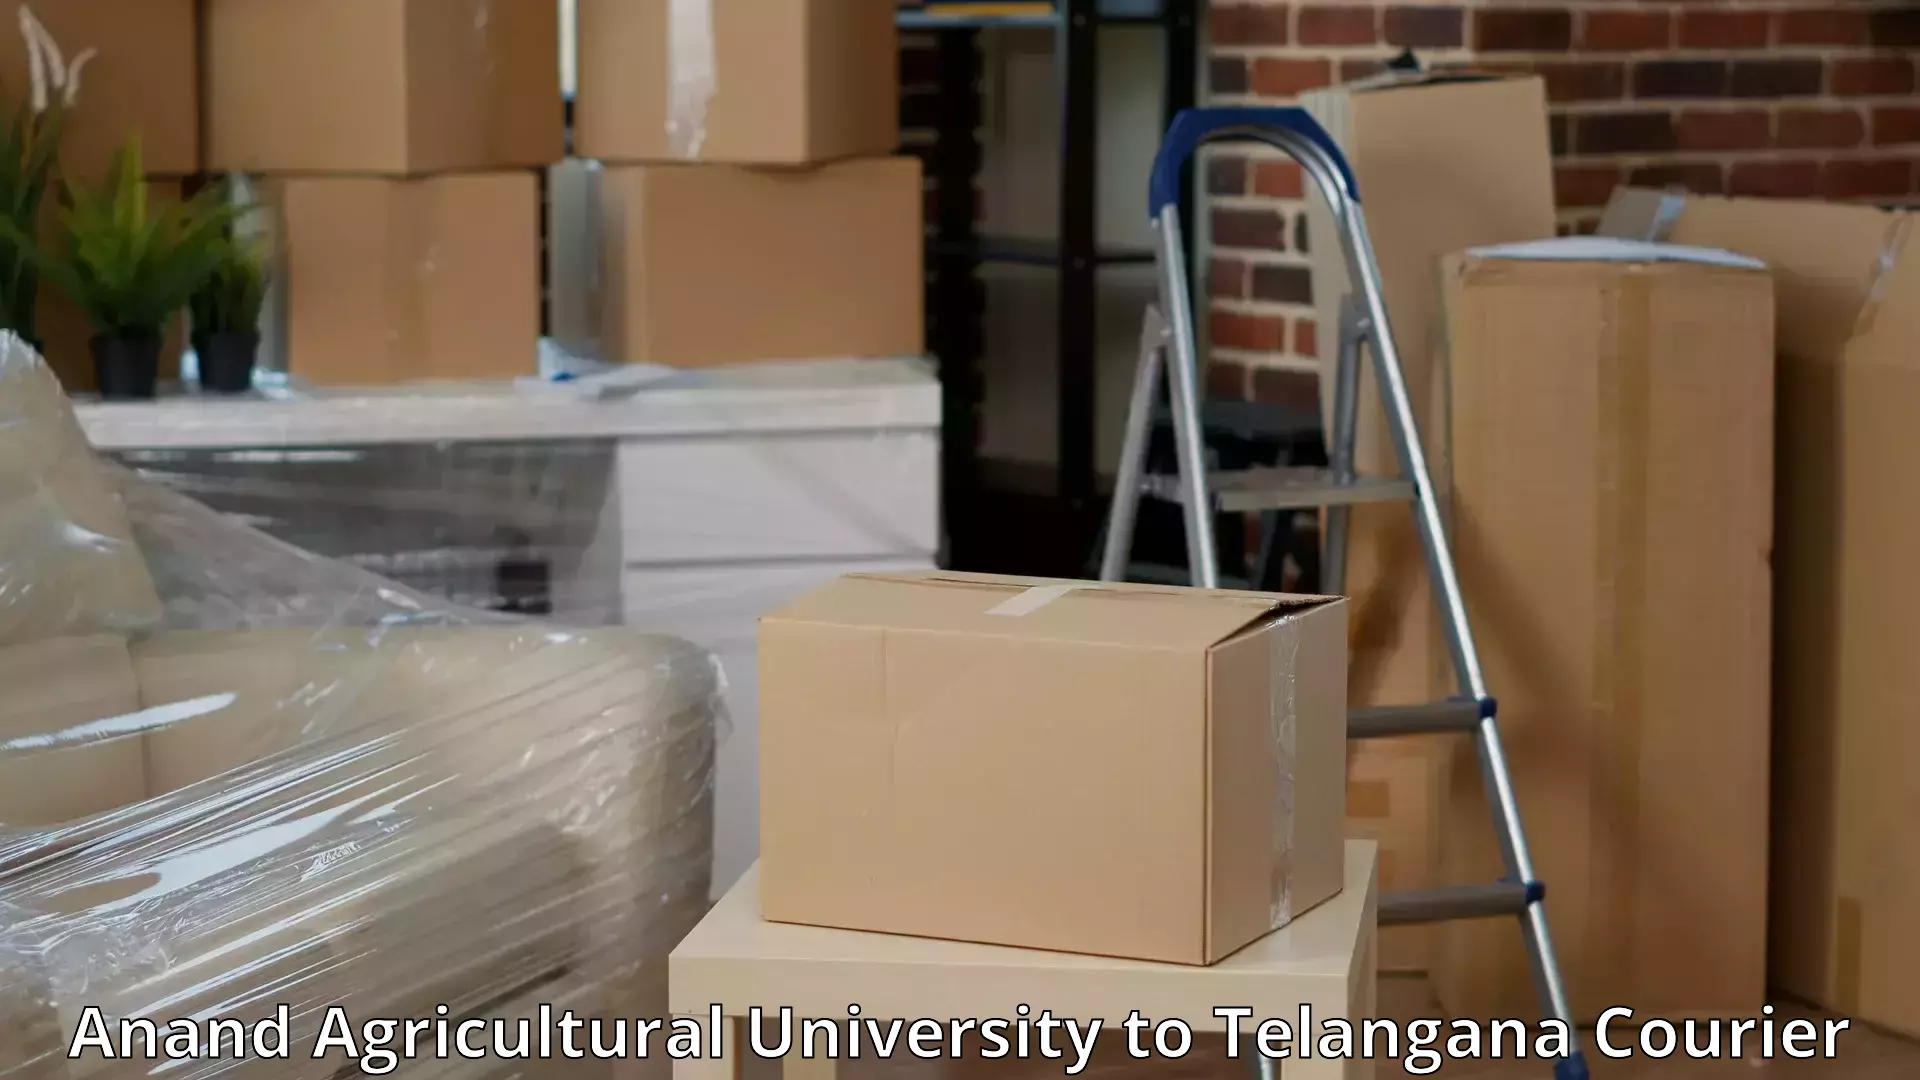 Full-service furniture transport Anand Agricultural University to Tallada